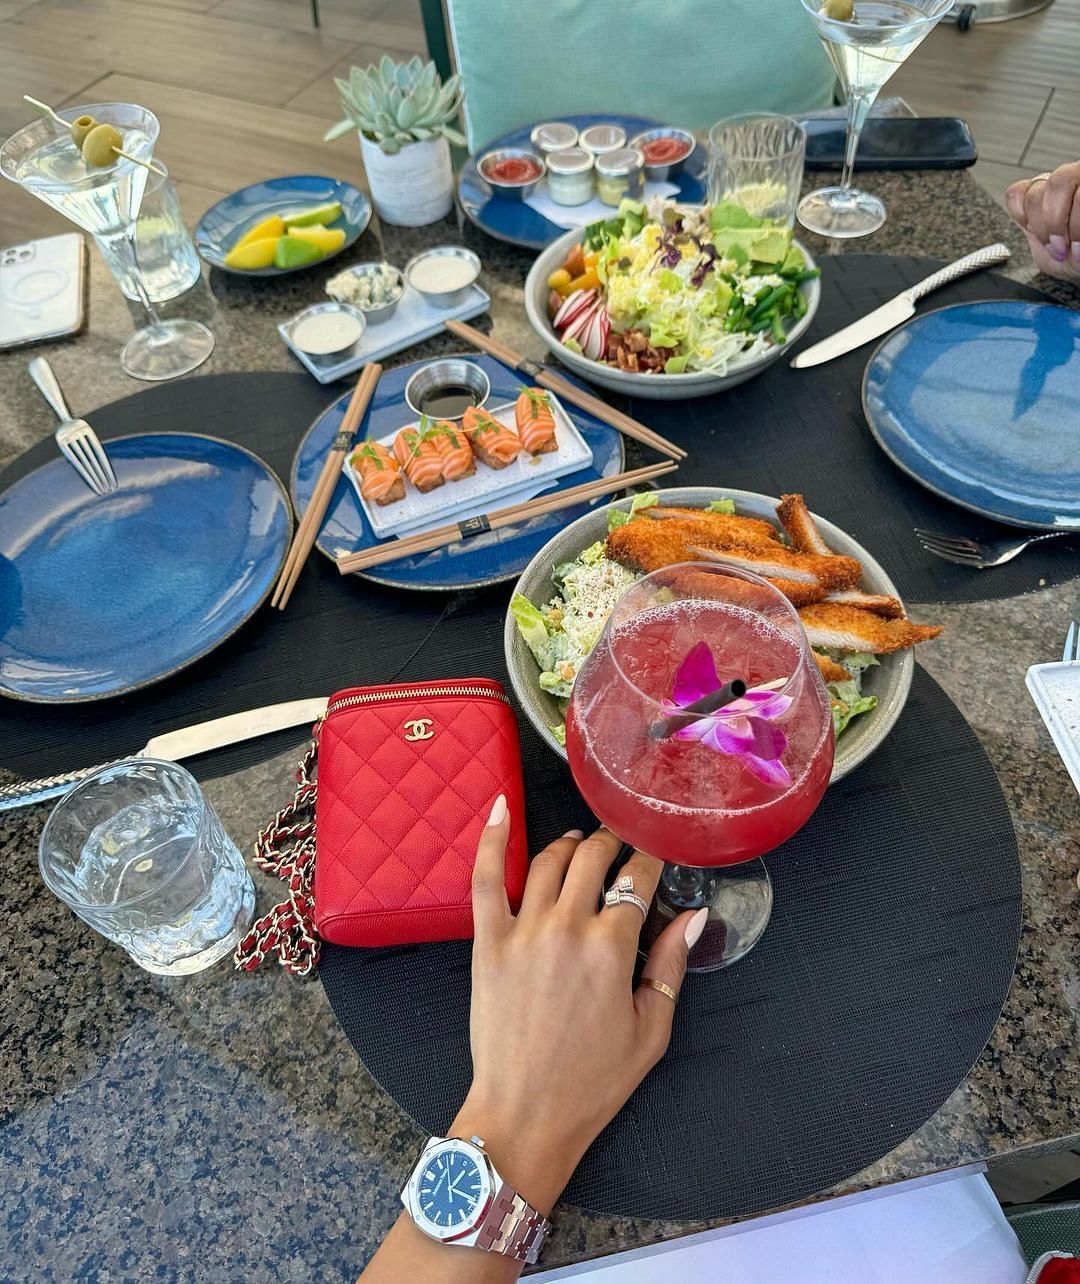 Anais and her meal during her vacation